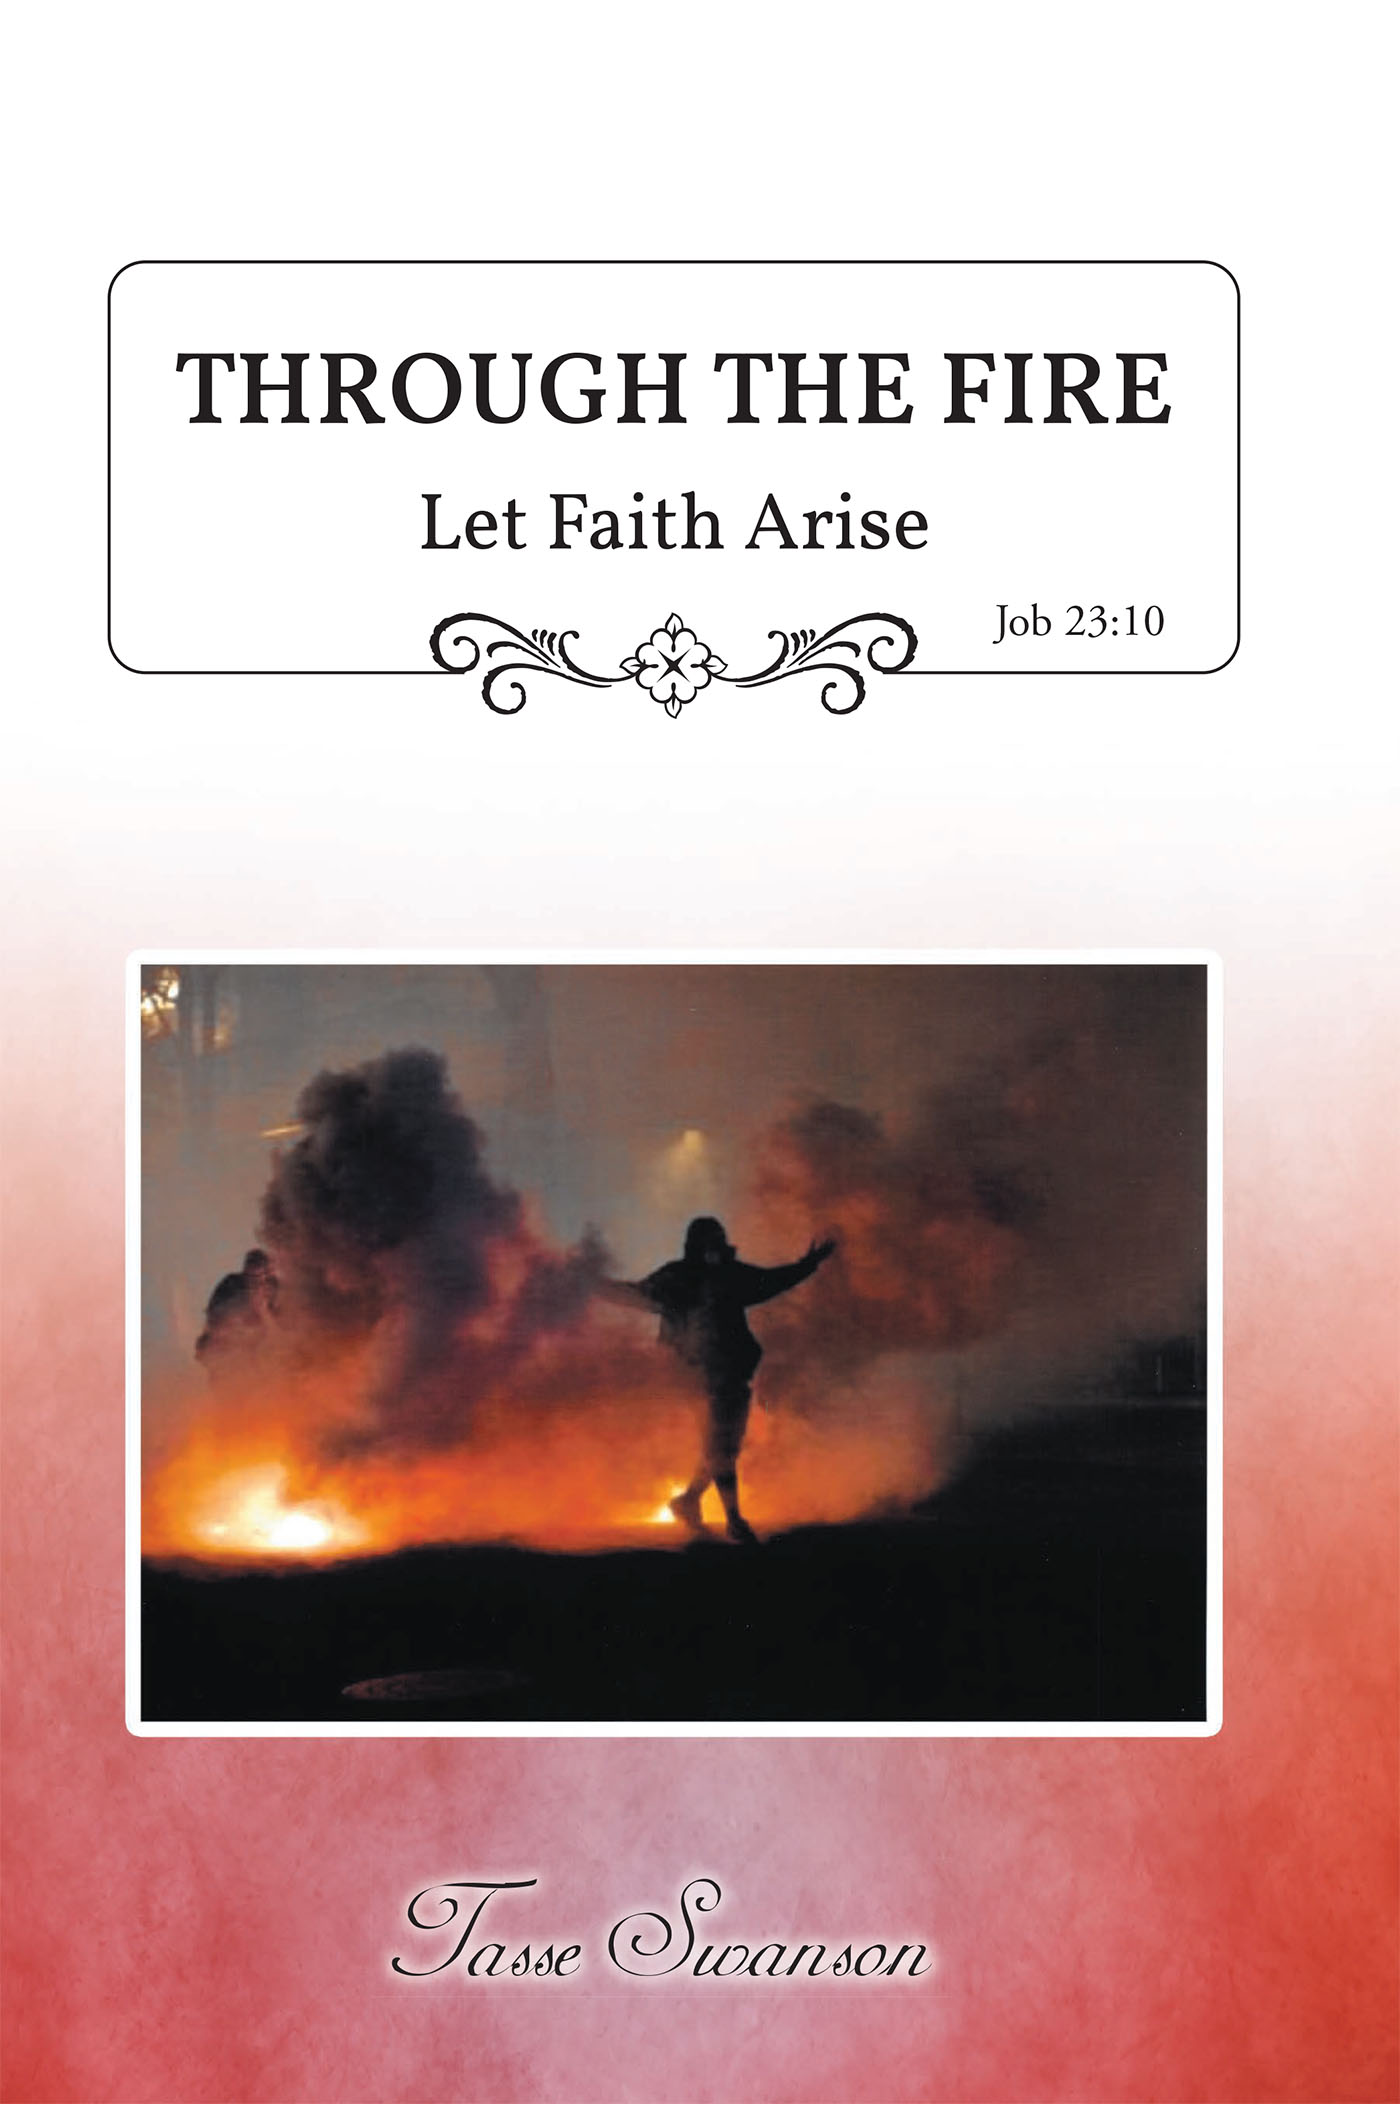 Tasse Swanson’s Newly Released “Through the Fire: Let Faith Arise: Job 23:10” is a Message of Comfort During Times of Heartbreak and Strife